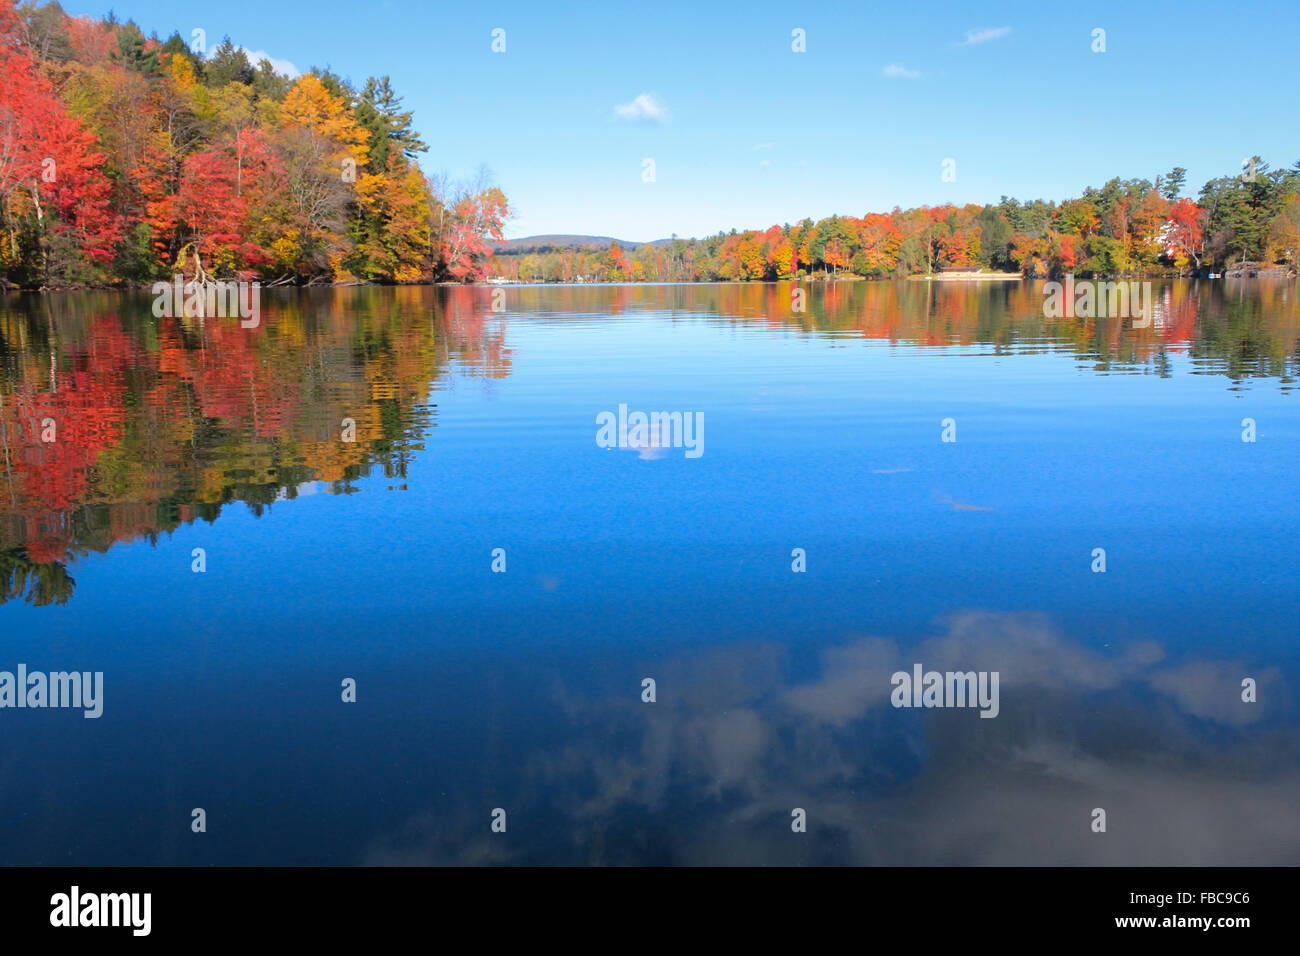 Colorful leaves reflected on Lake Laurel. Photographed in Lee, MA in Oct 2014. Stock Photo